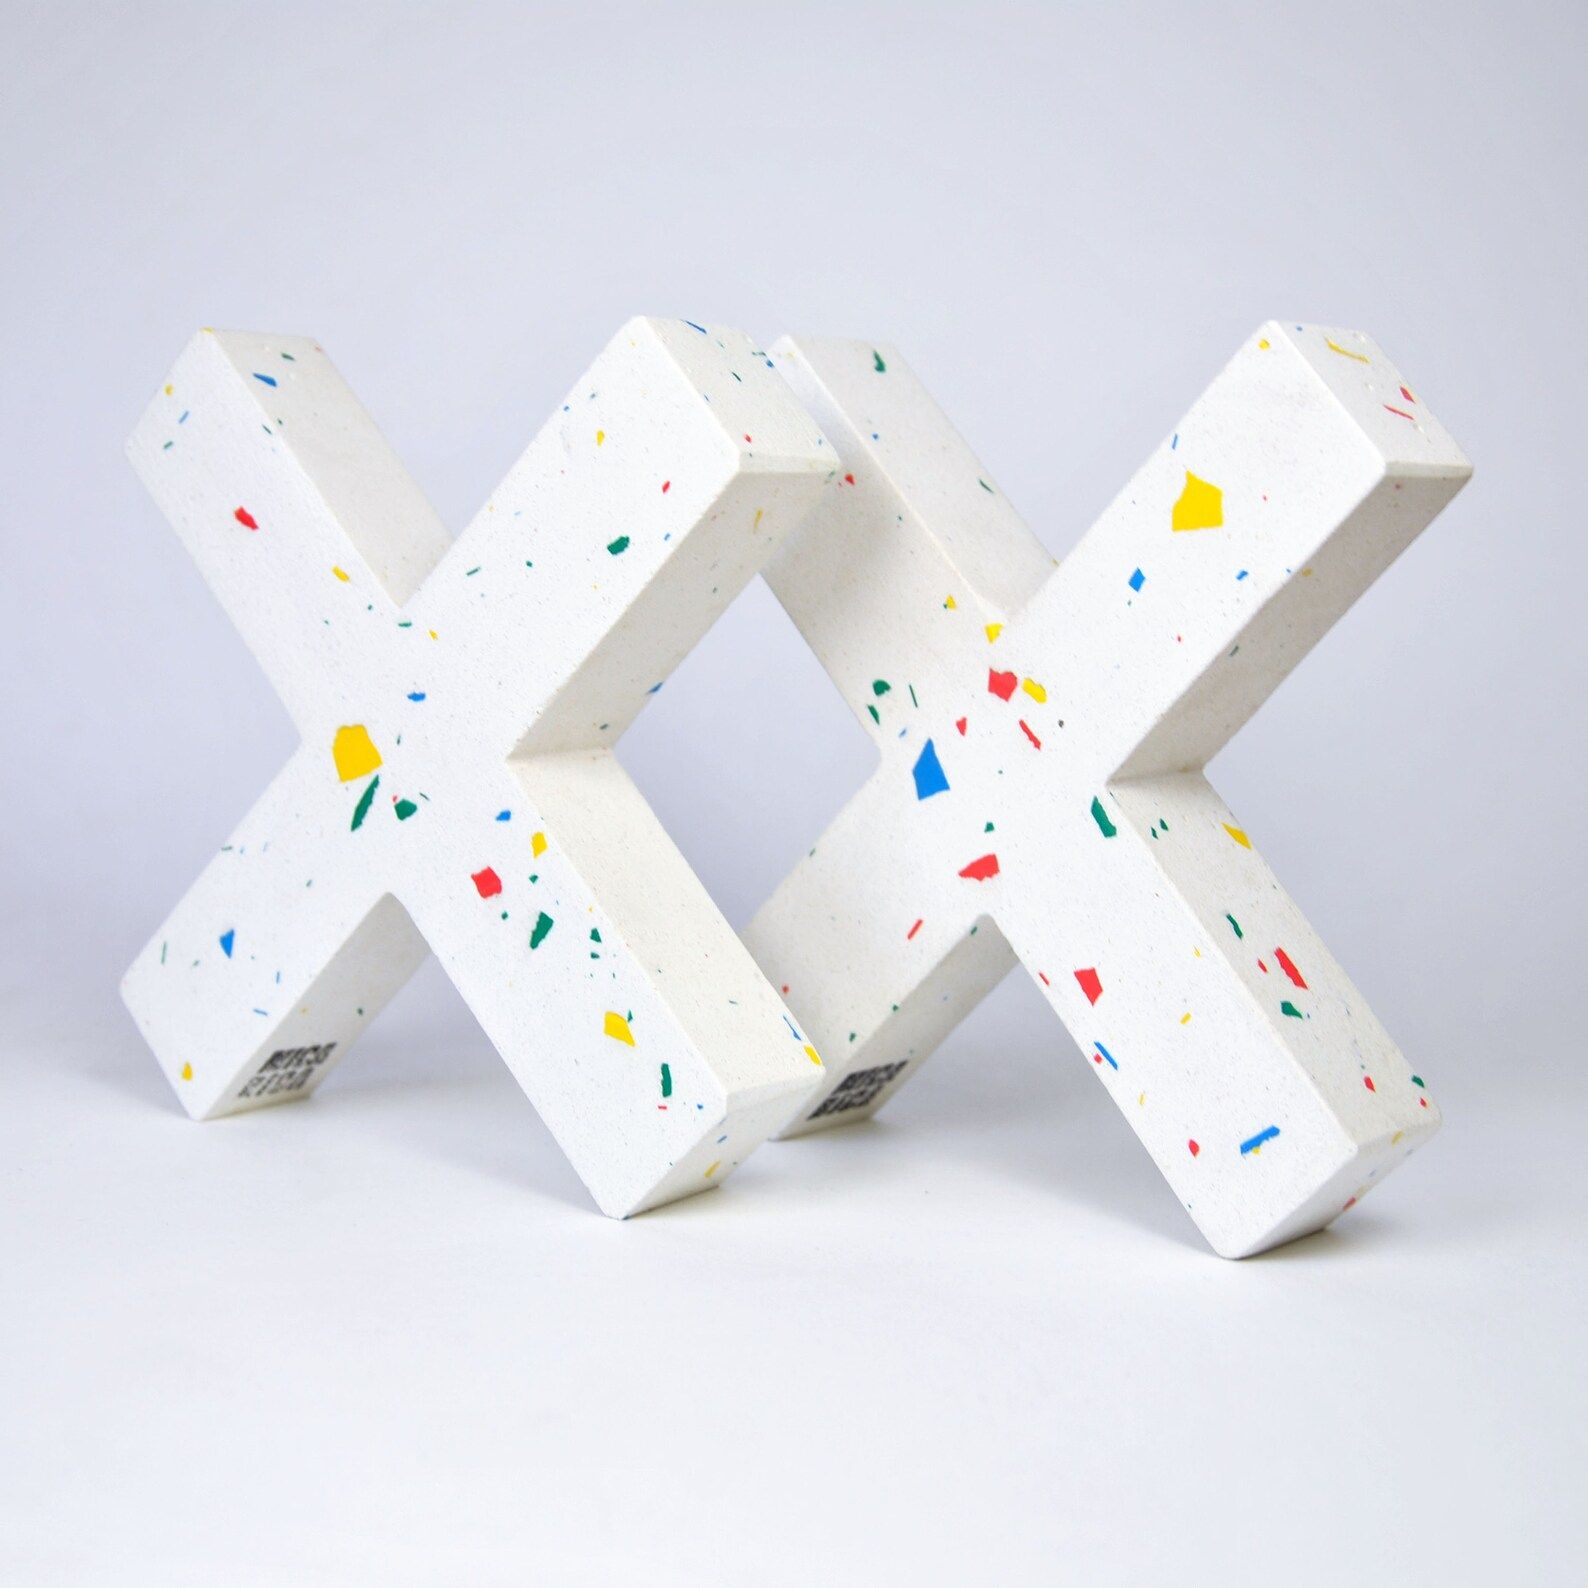 2 white bookends flecked with color in the shape of "X"